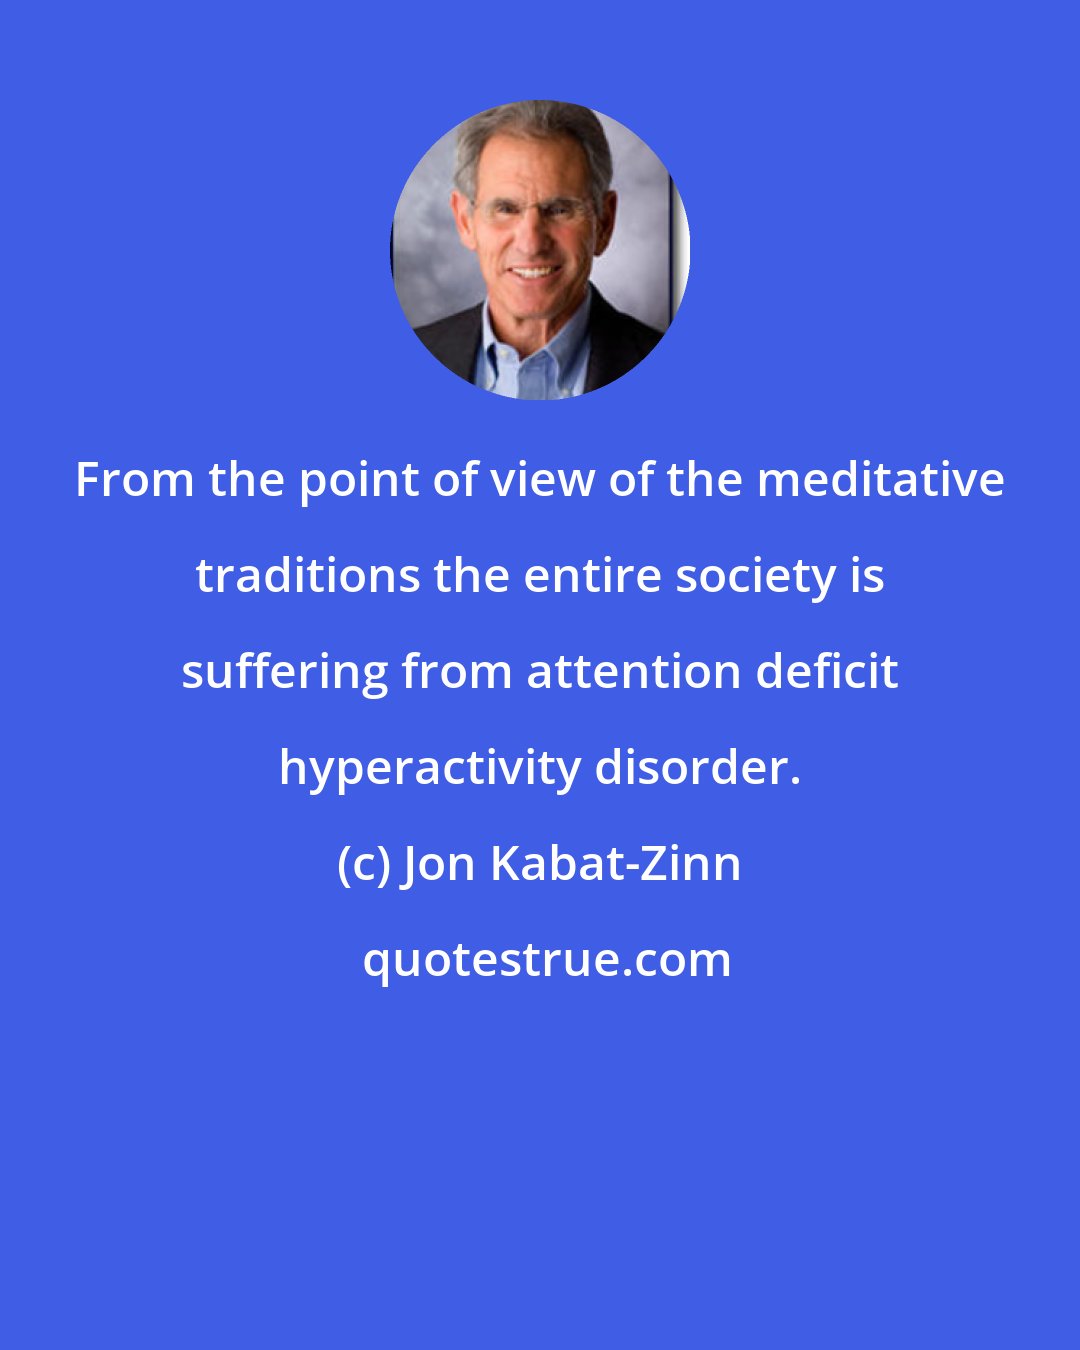 Jon Kabat-Zinn: From the point of view of the meditative traditions the entire society is suffering from attention deficit hyperactivity disorder.